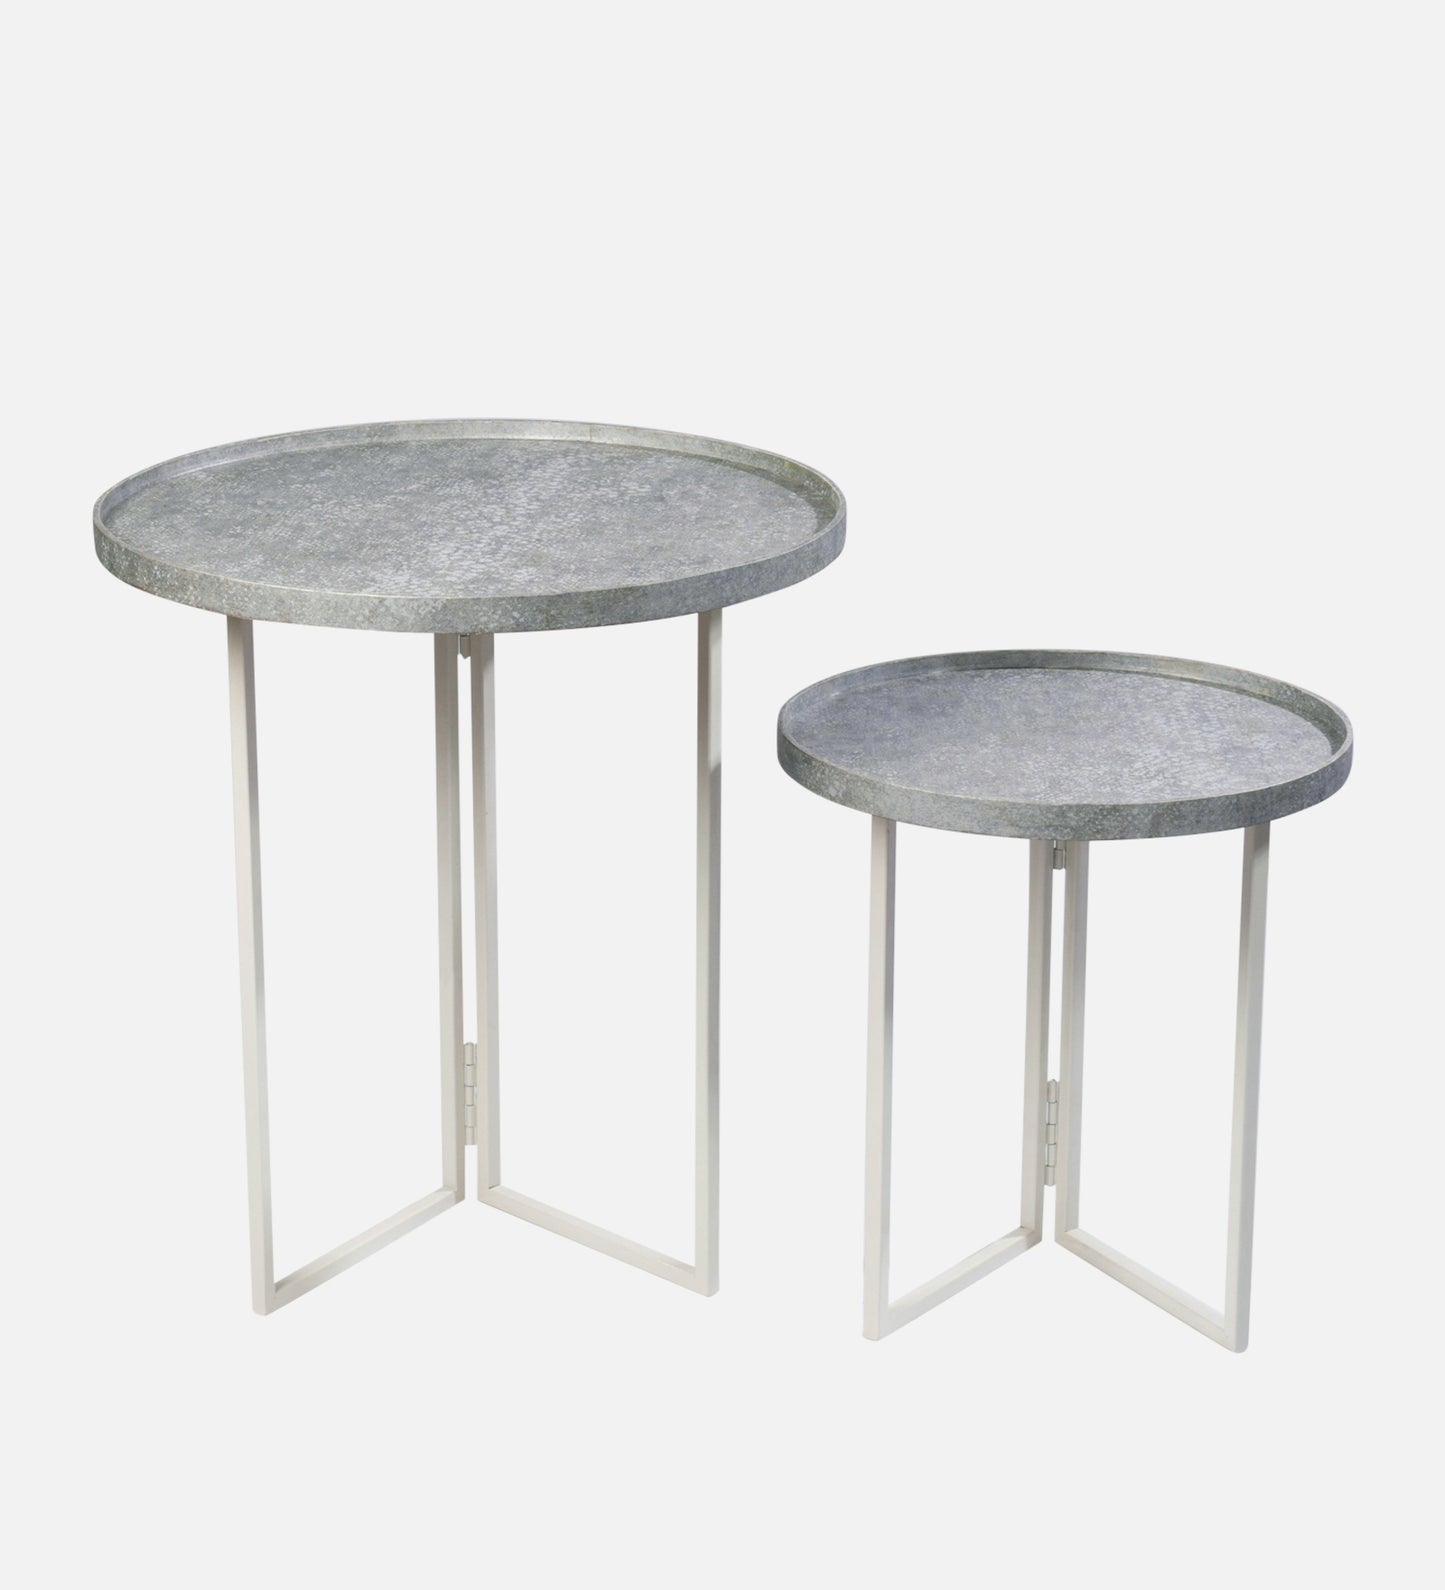 Transcendent Tinge Powder Blue Round Oblique Nesting Tables, Side Tables, Wooden Tables, Living Room Decor by A Tiny Mistake